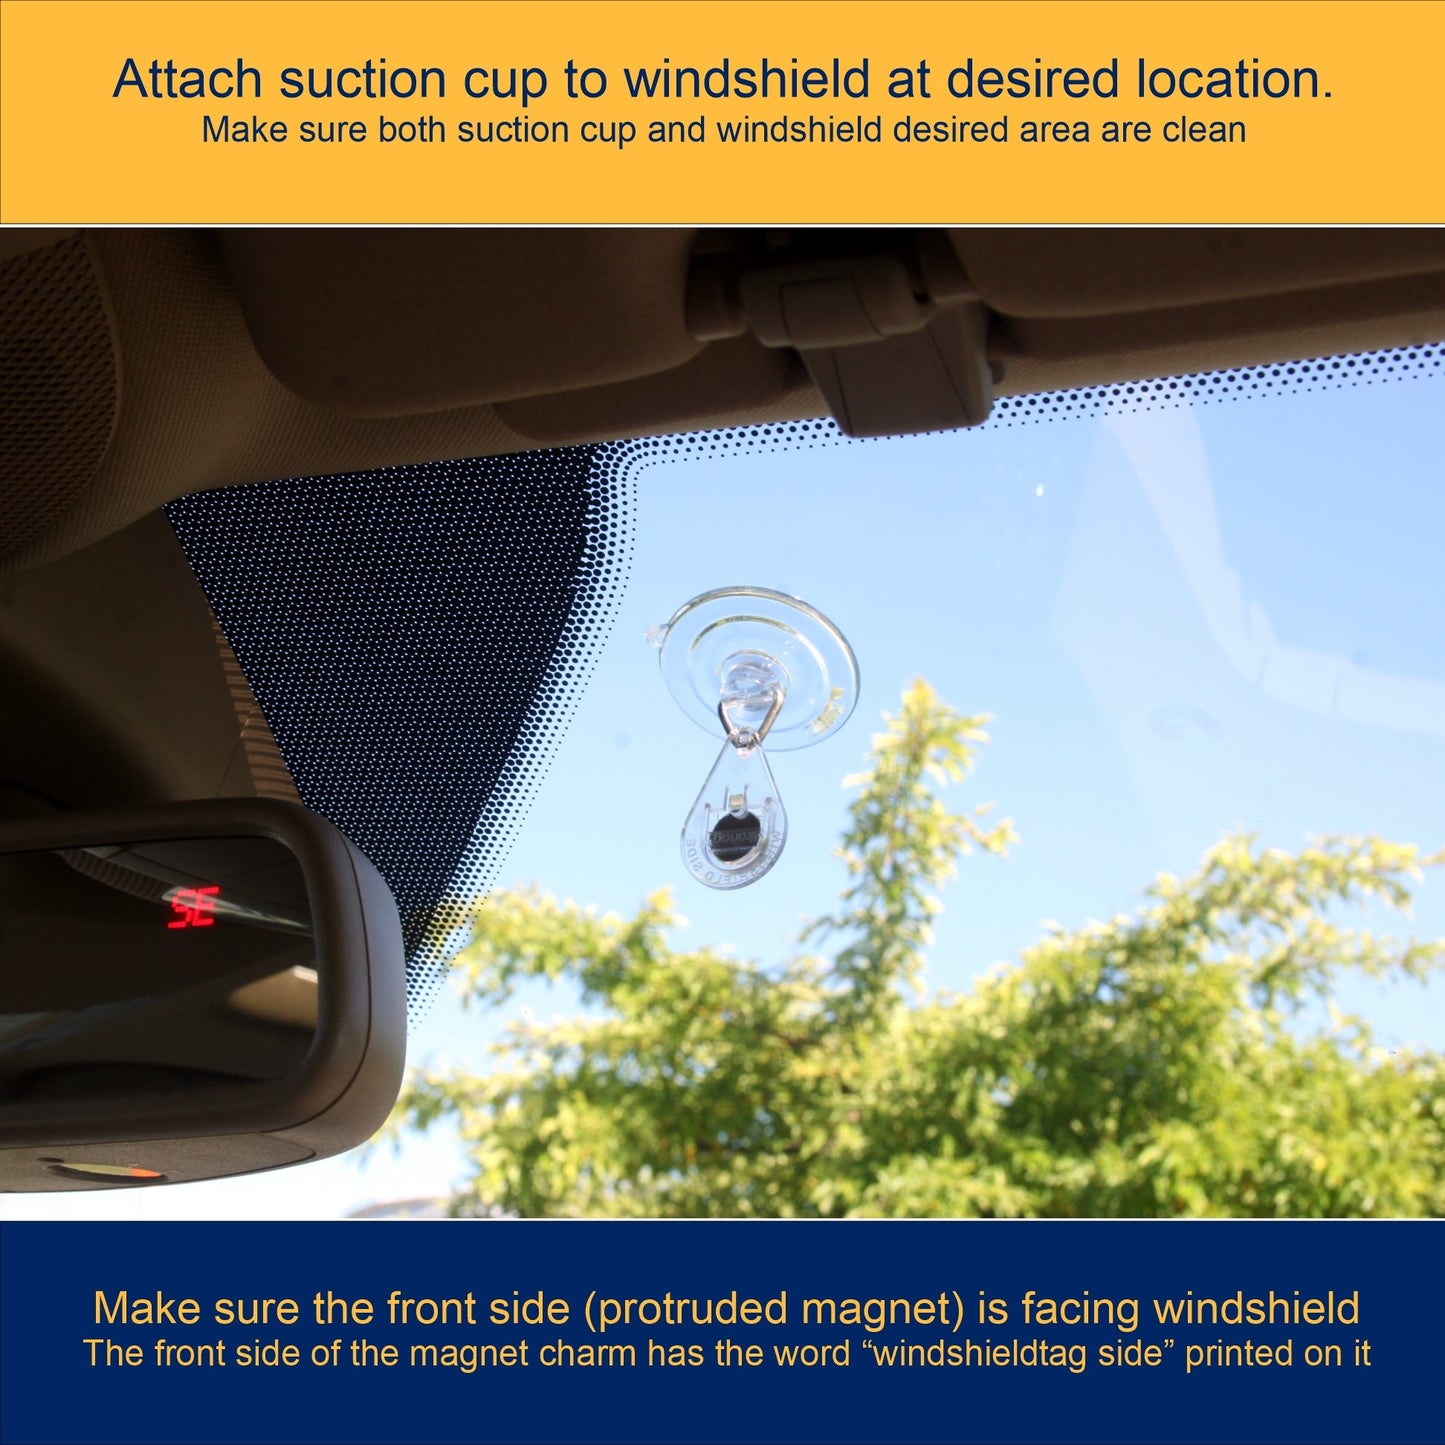 suction cup with magnet charm attached to windshield